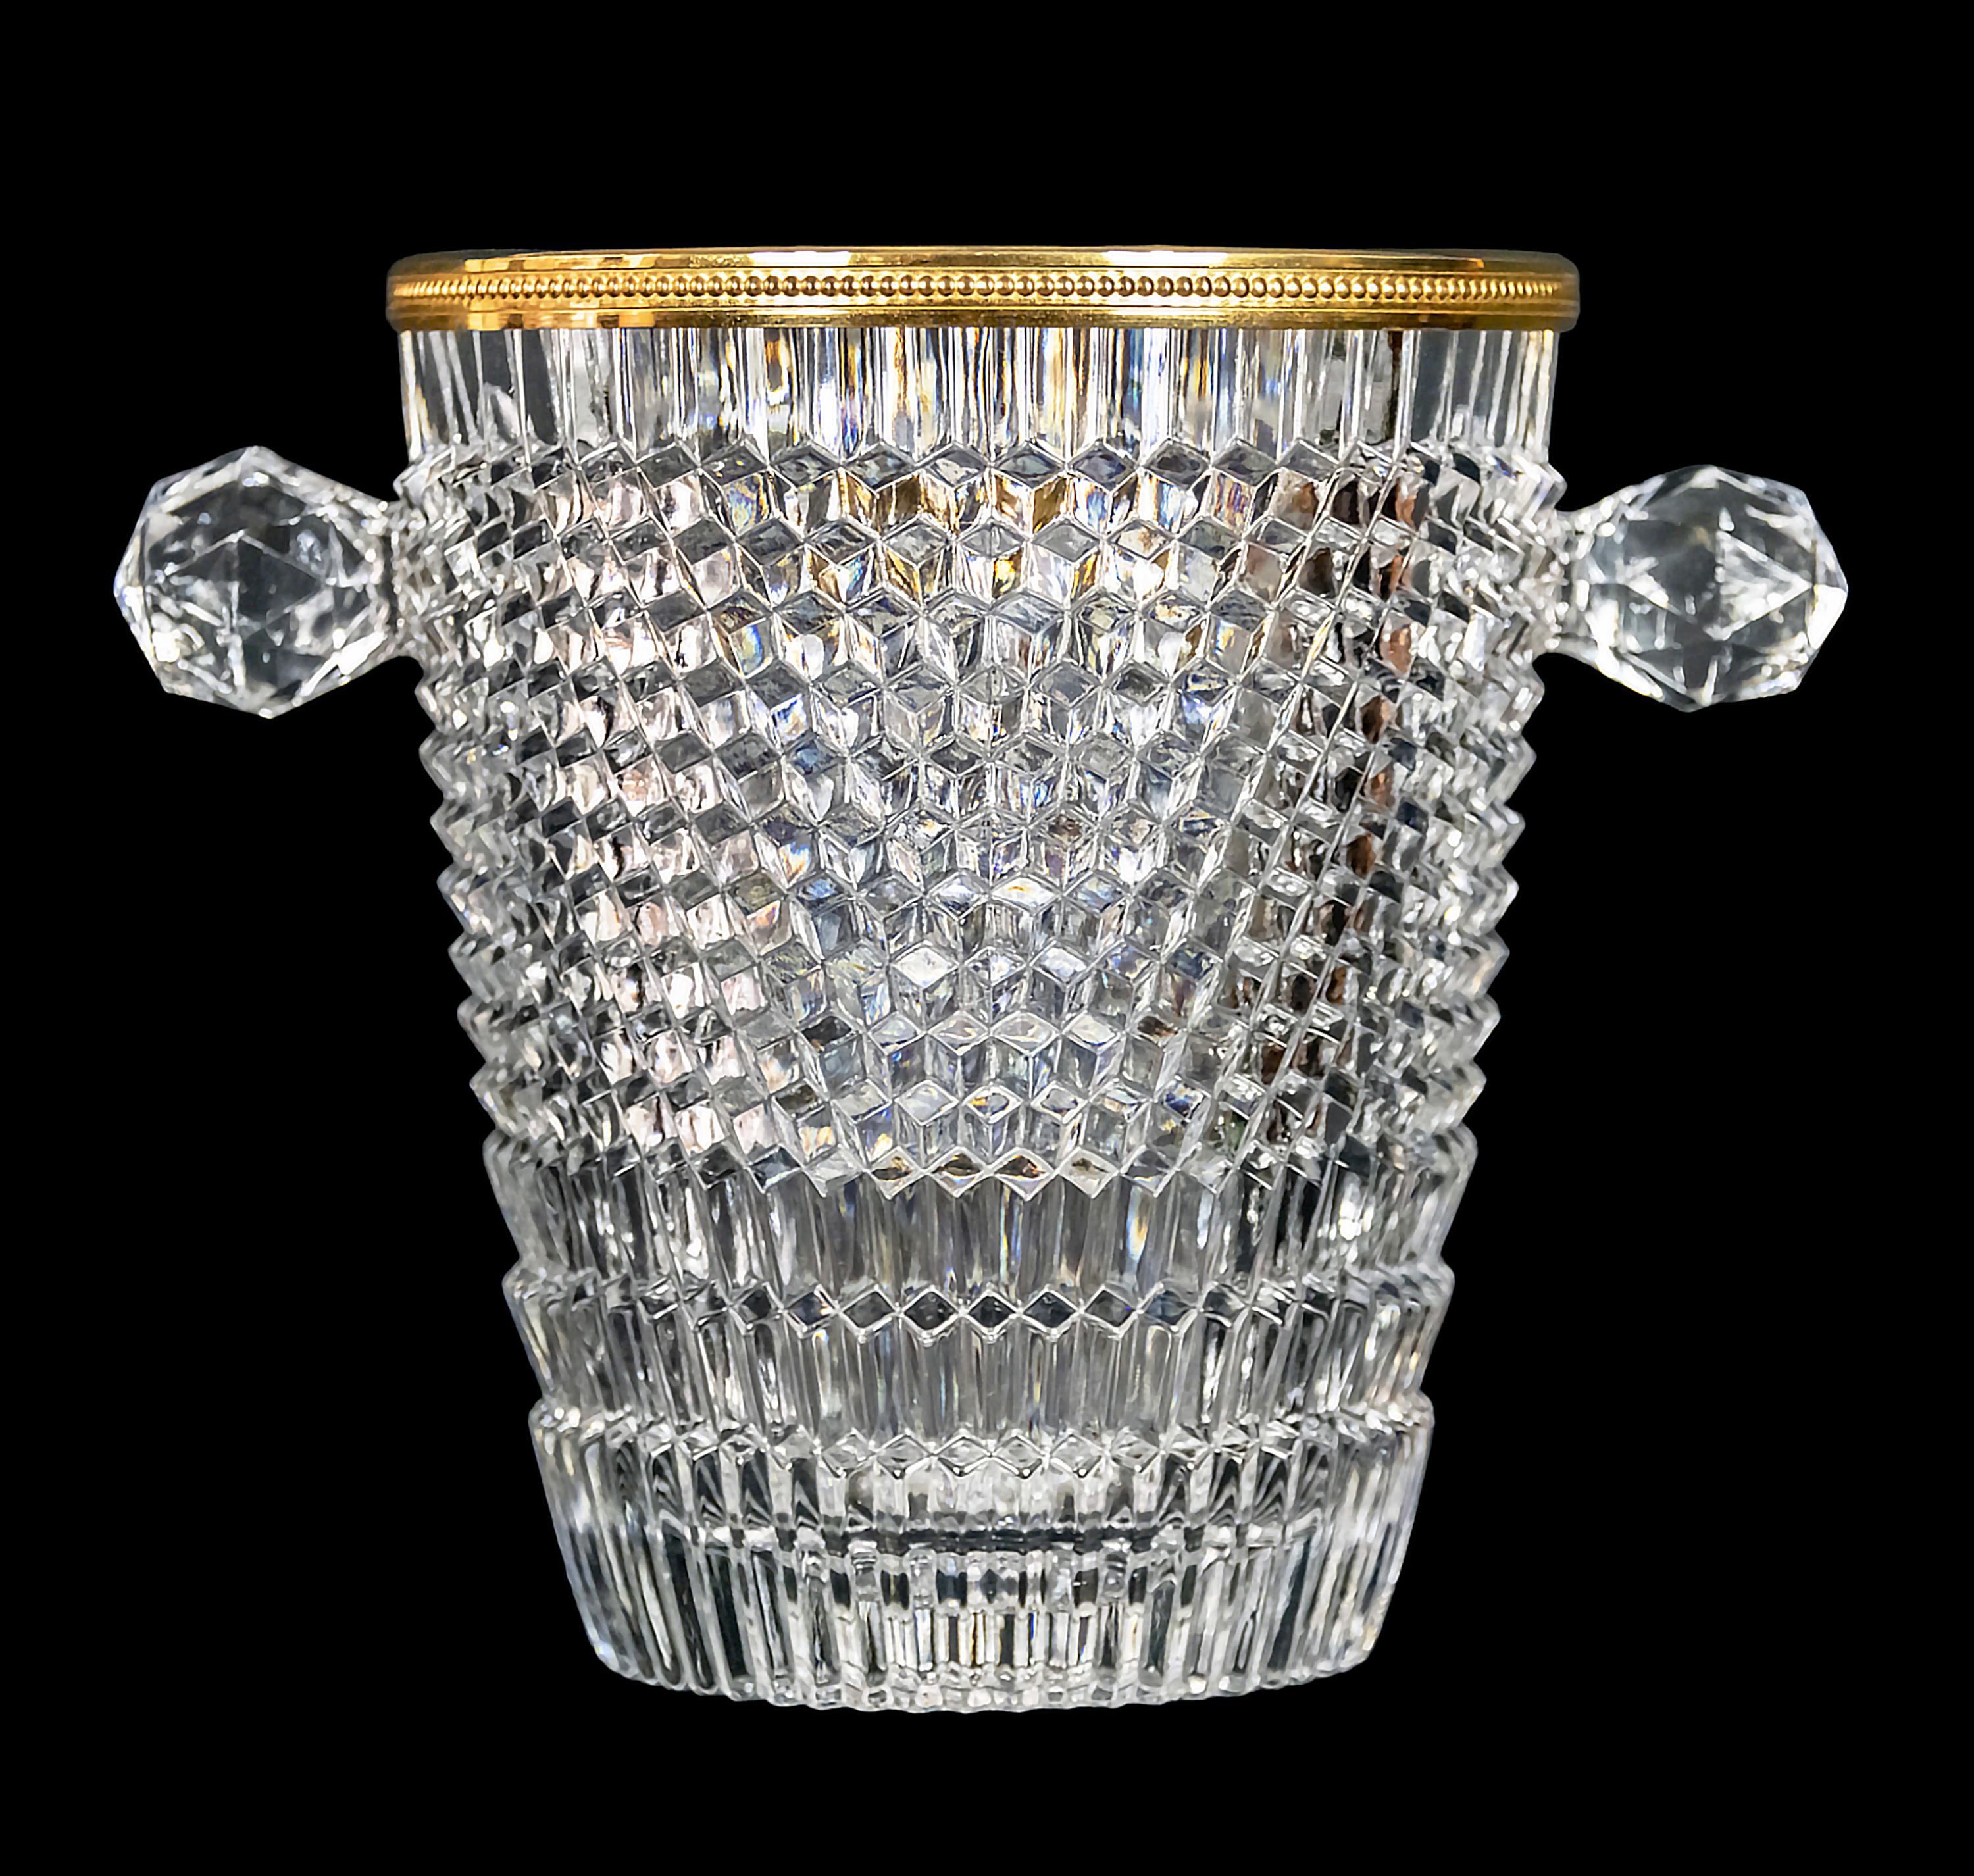 Vintage French hand made cut crystal champagne bucket with handles decorated with gilt metal trim.

